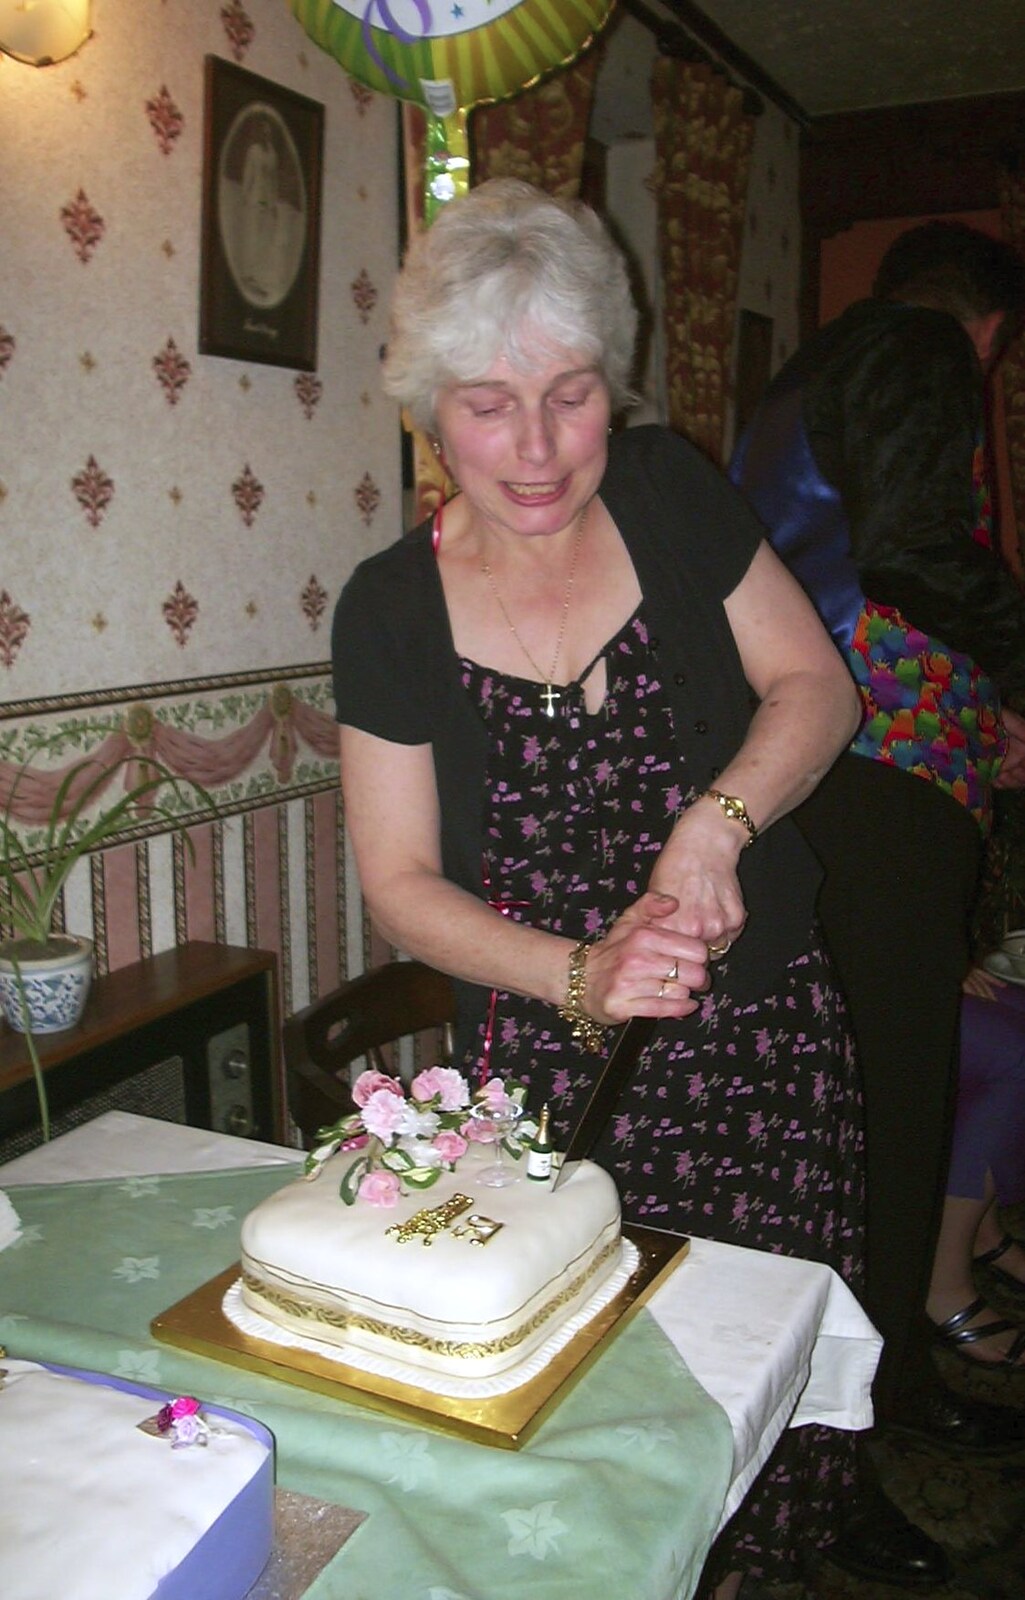 Spammy cuts her cake from Spammy's 50th Birthday at the Swan Inn, Brome, Suffolk - 26th April 2003